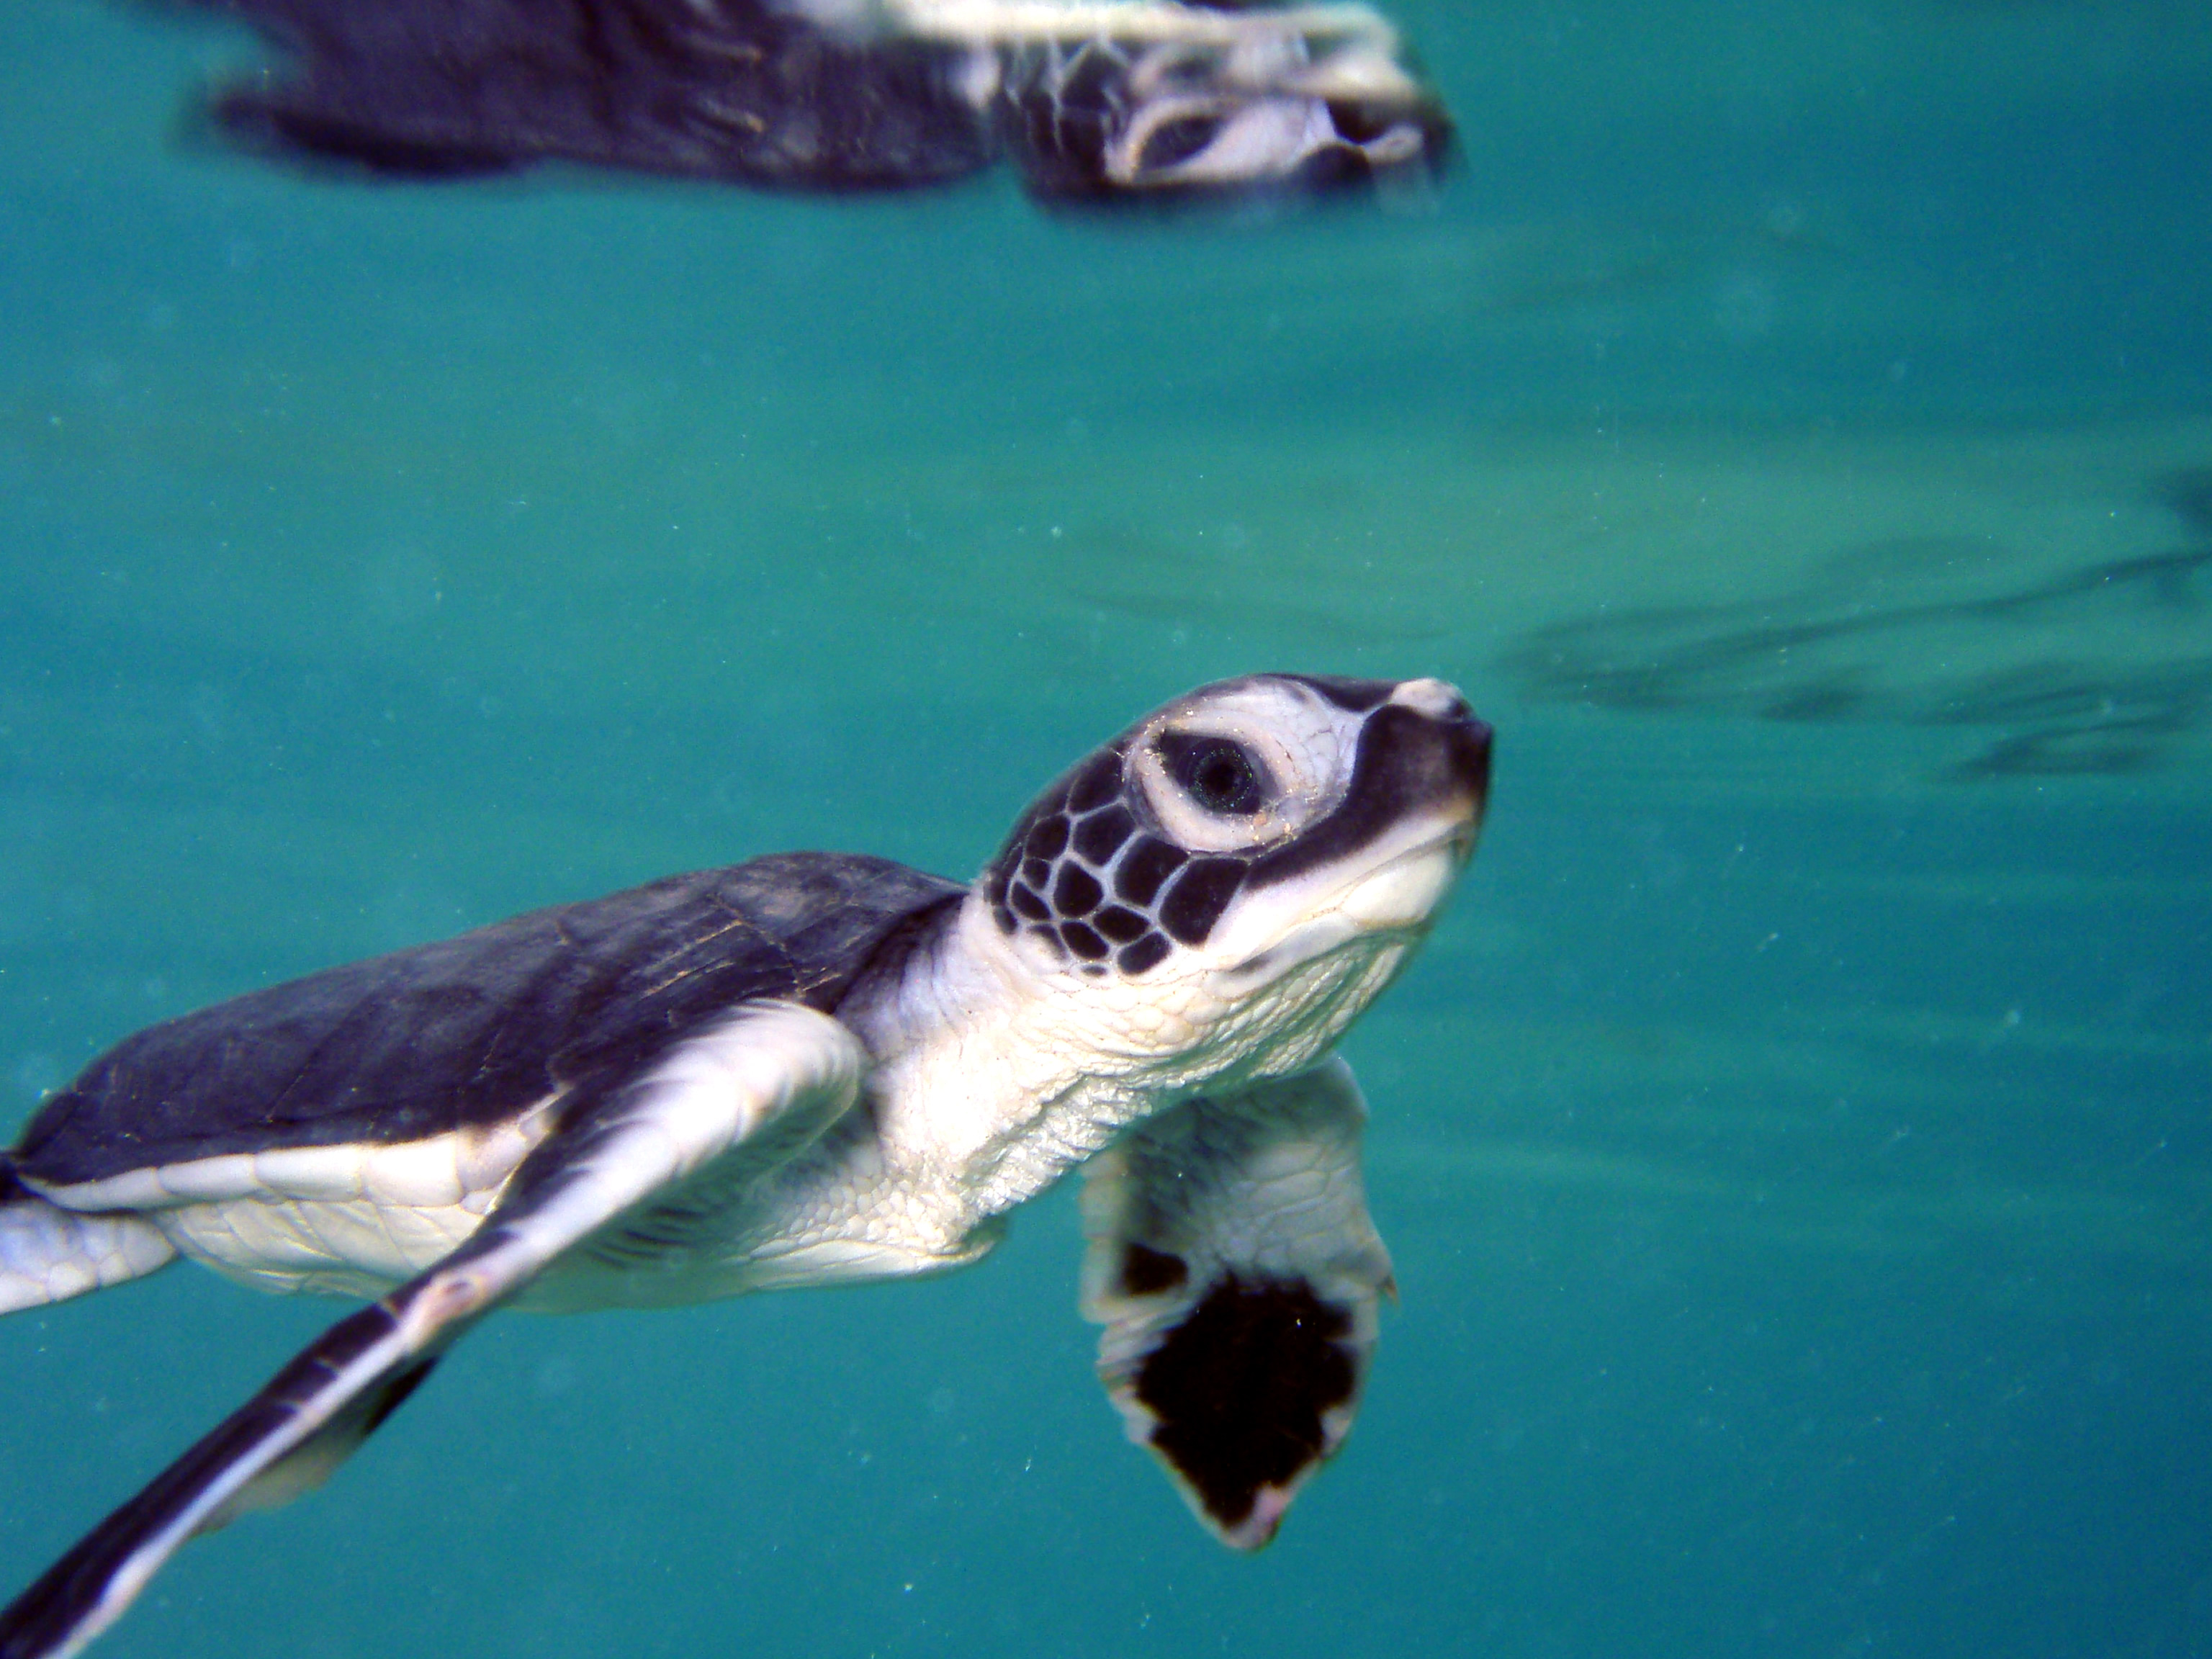 Lawsuit Launched to Protect Green Sea Turtle Habitat Threatened by Sea-level Rise, Plastic Pollution, Warming